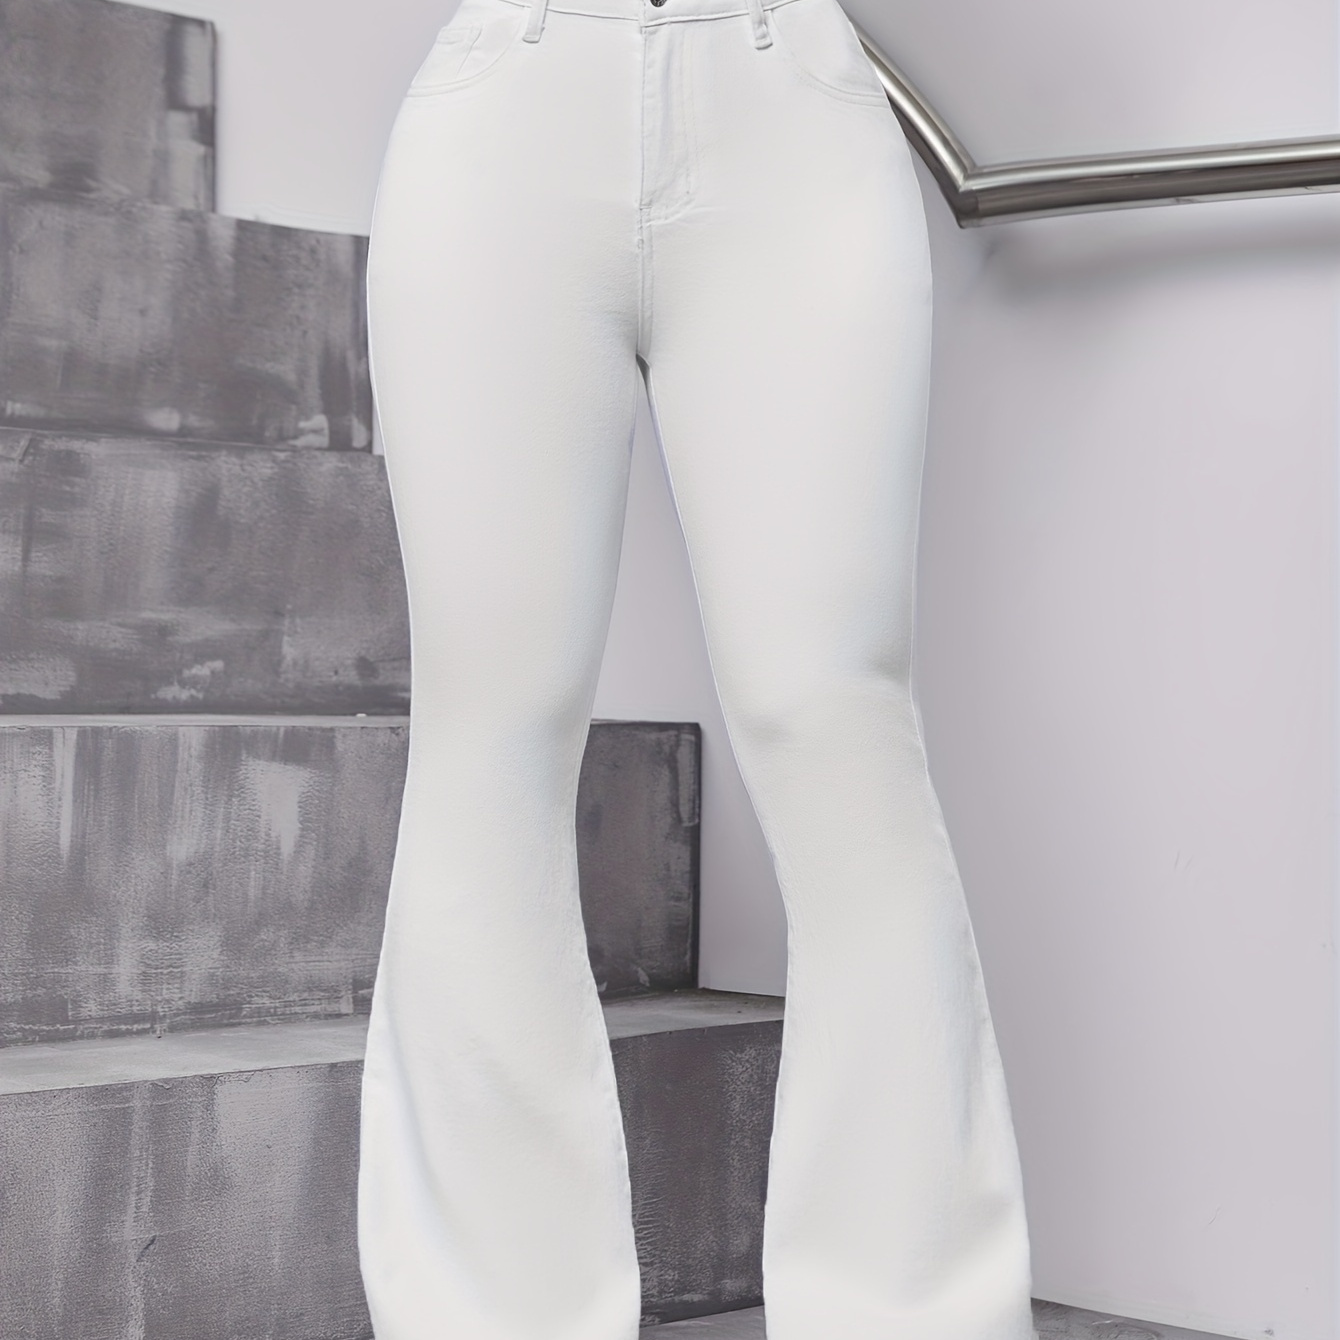 

High-waisted Elegant White Stretchy Slim Fit Women's Flared Jeans, Fashionable Versatile Bell-bottom Pants For Ladies